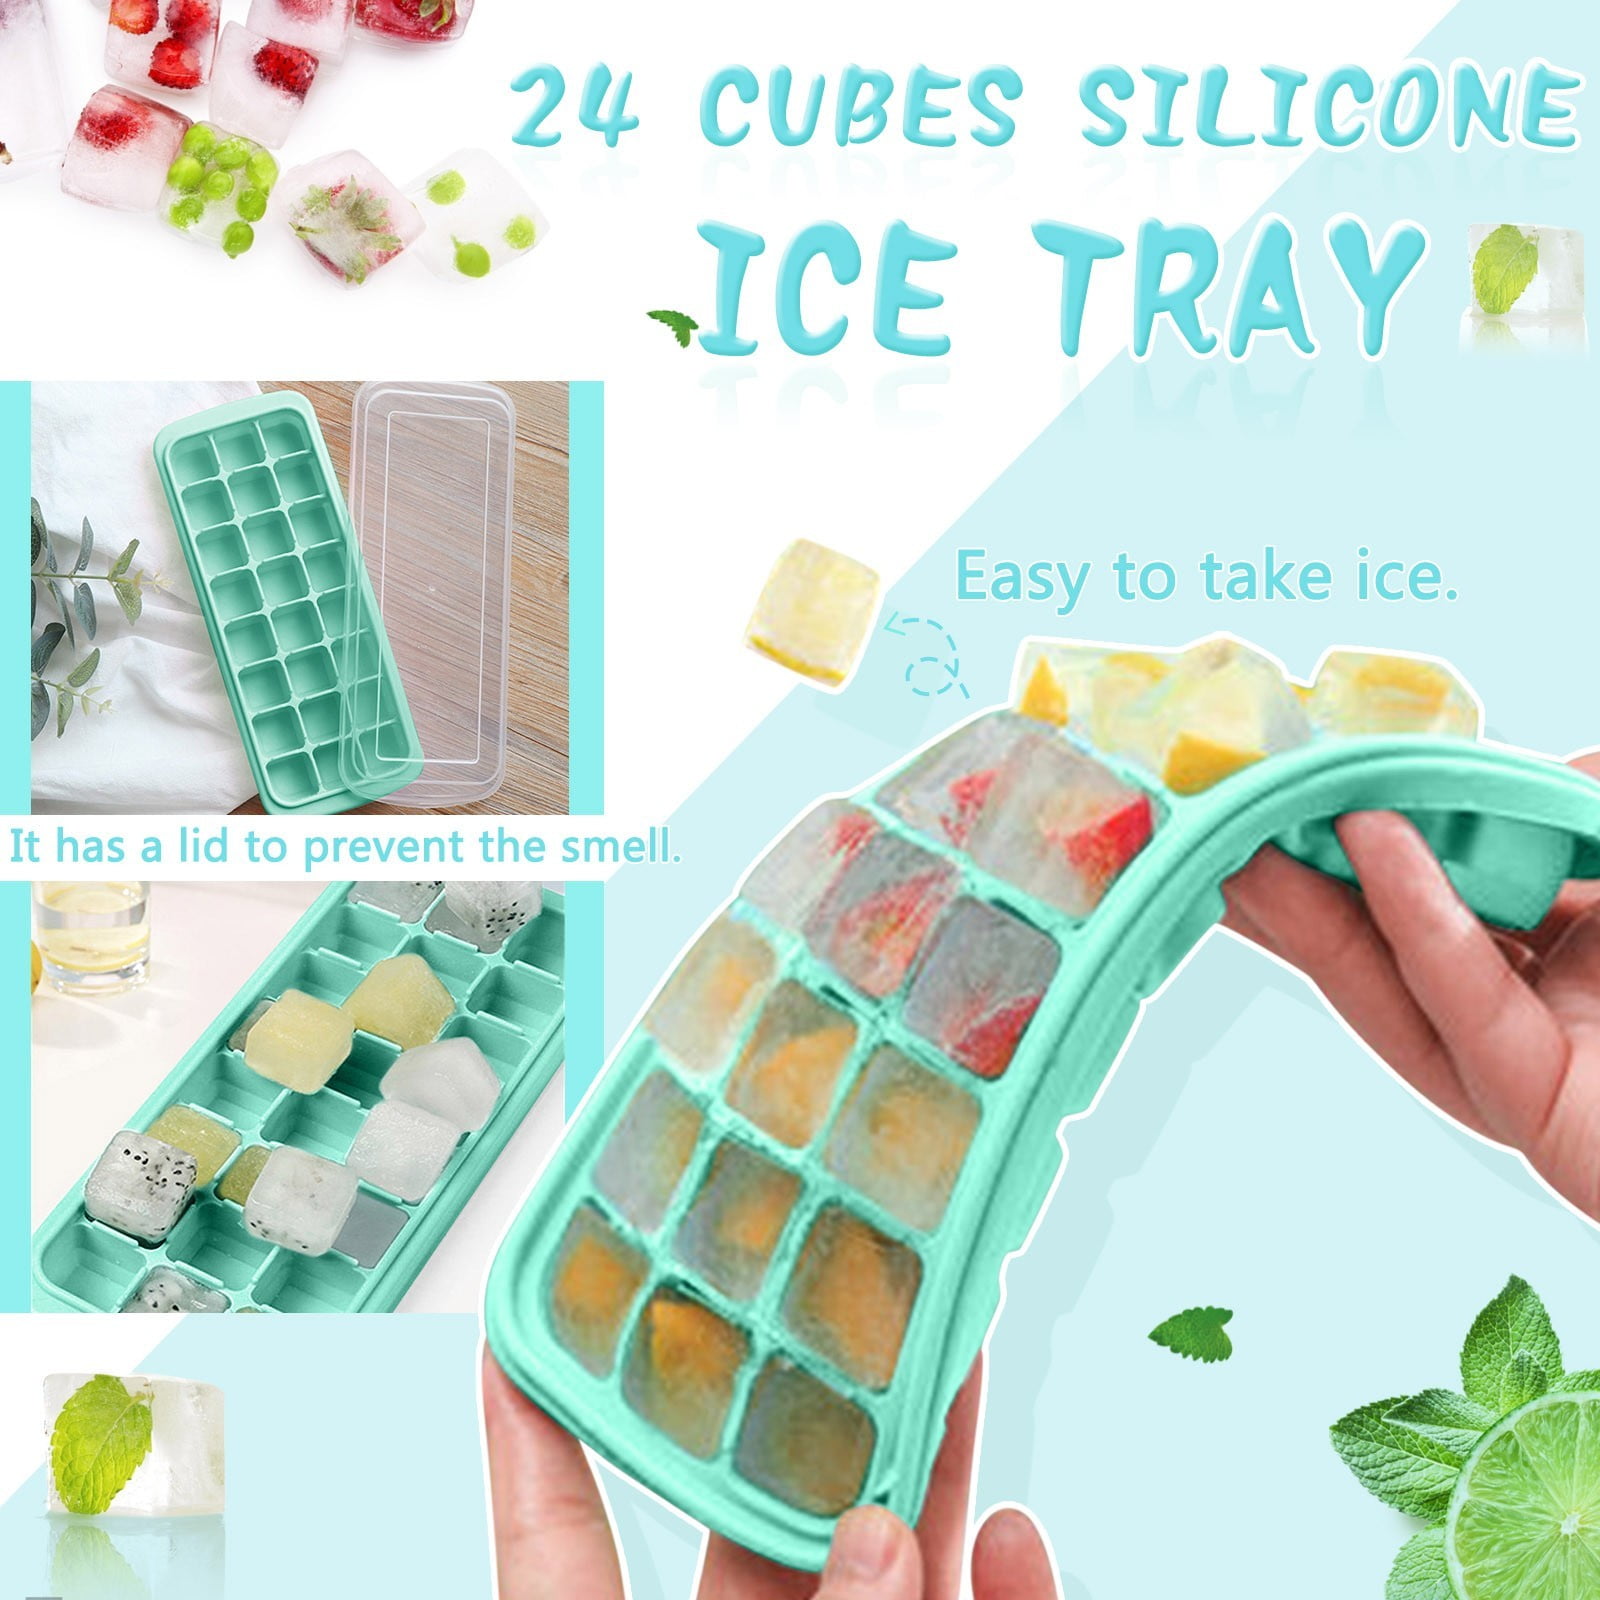 Phinox Ice Cube Tray: An under $25 kitchen score